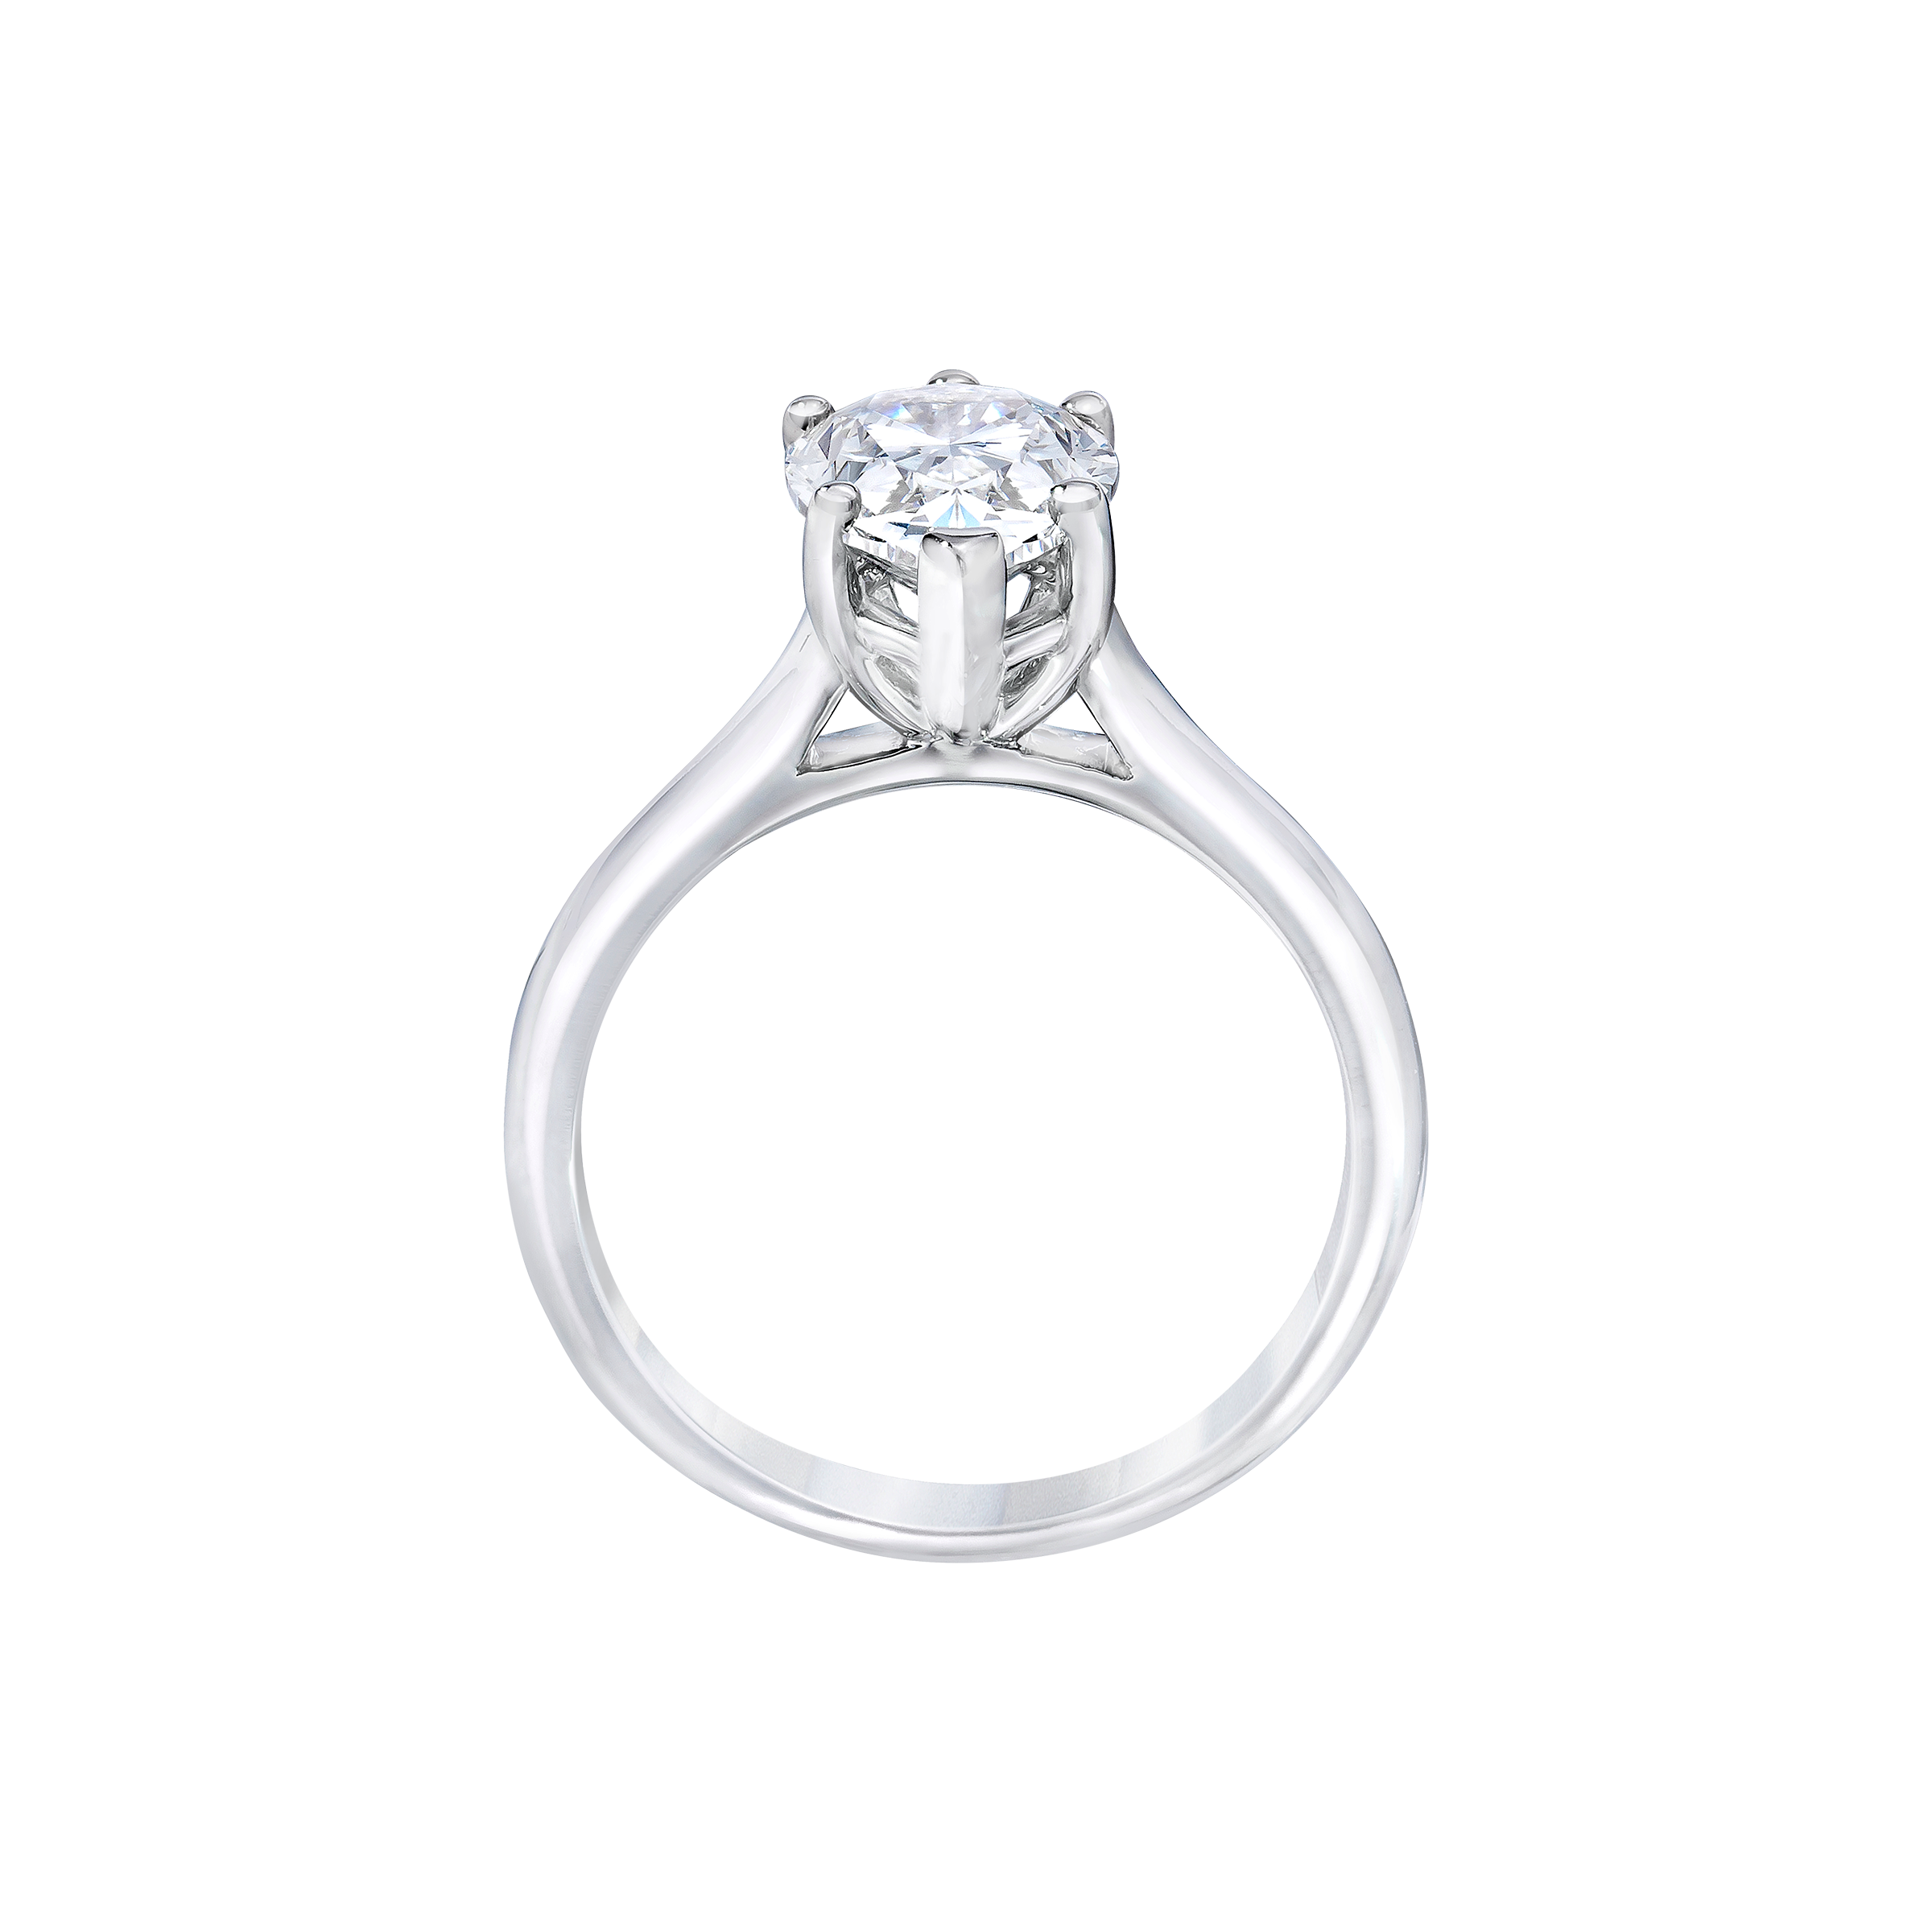 Pear Shaped Solitaire Diamond Engagement Ring in 18k White Gold